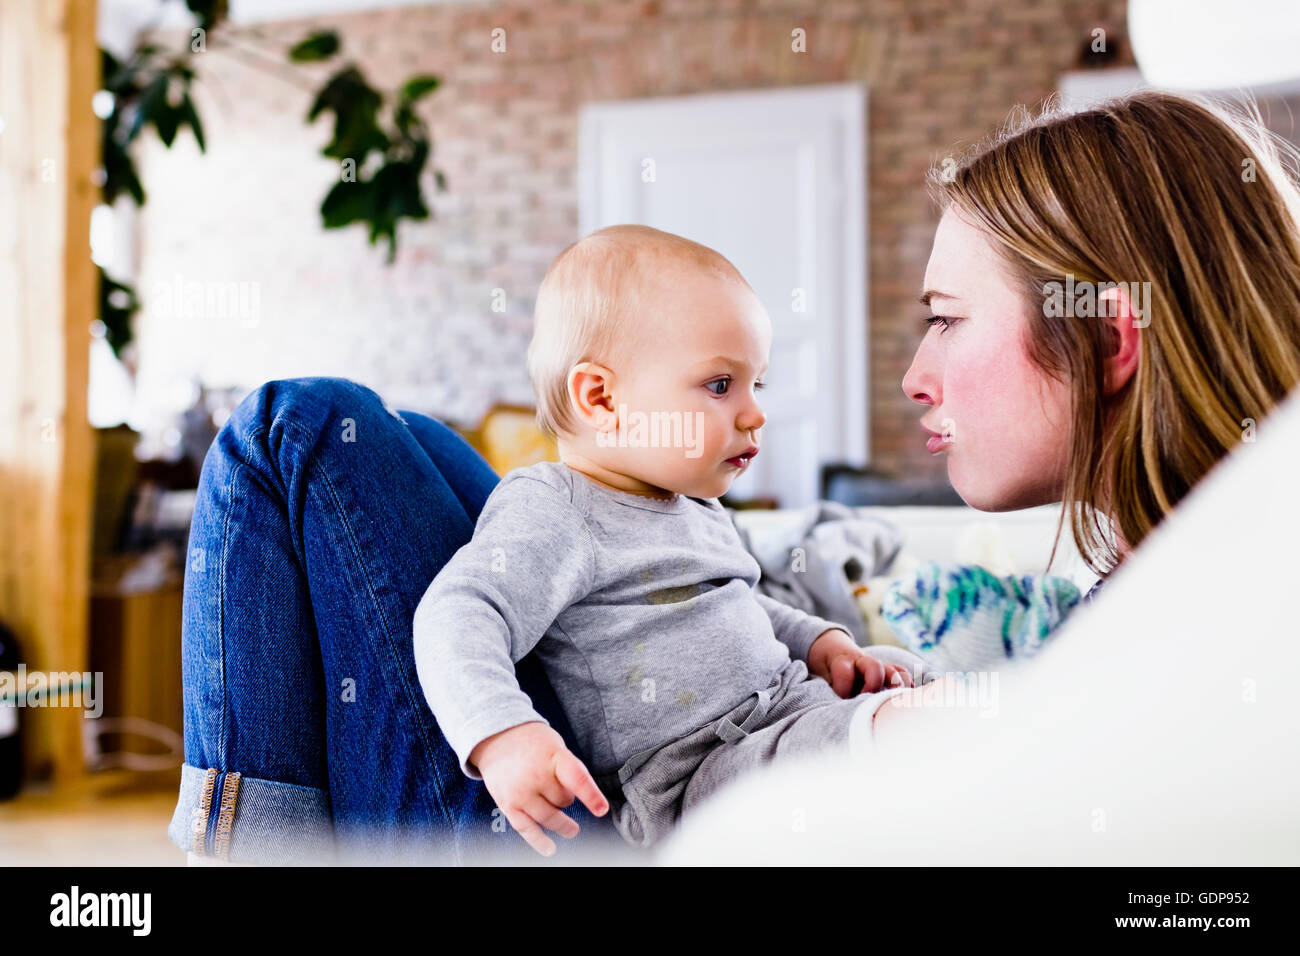 Mid adult woman and baby daughter pulling faces sur canapé Banque D'Images